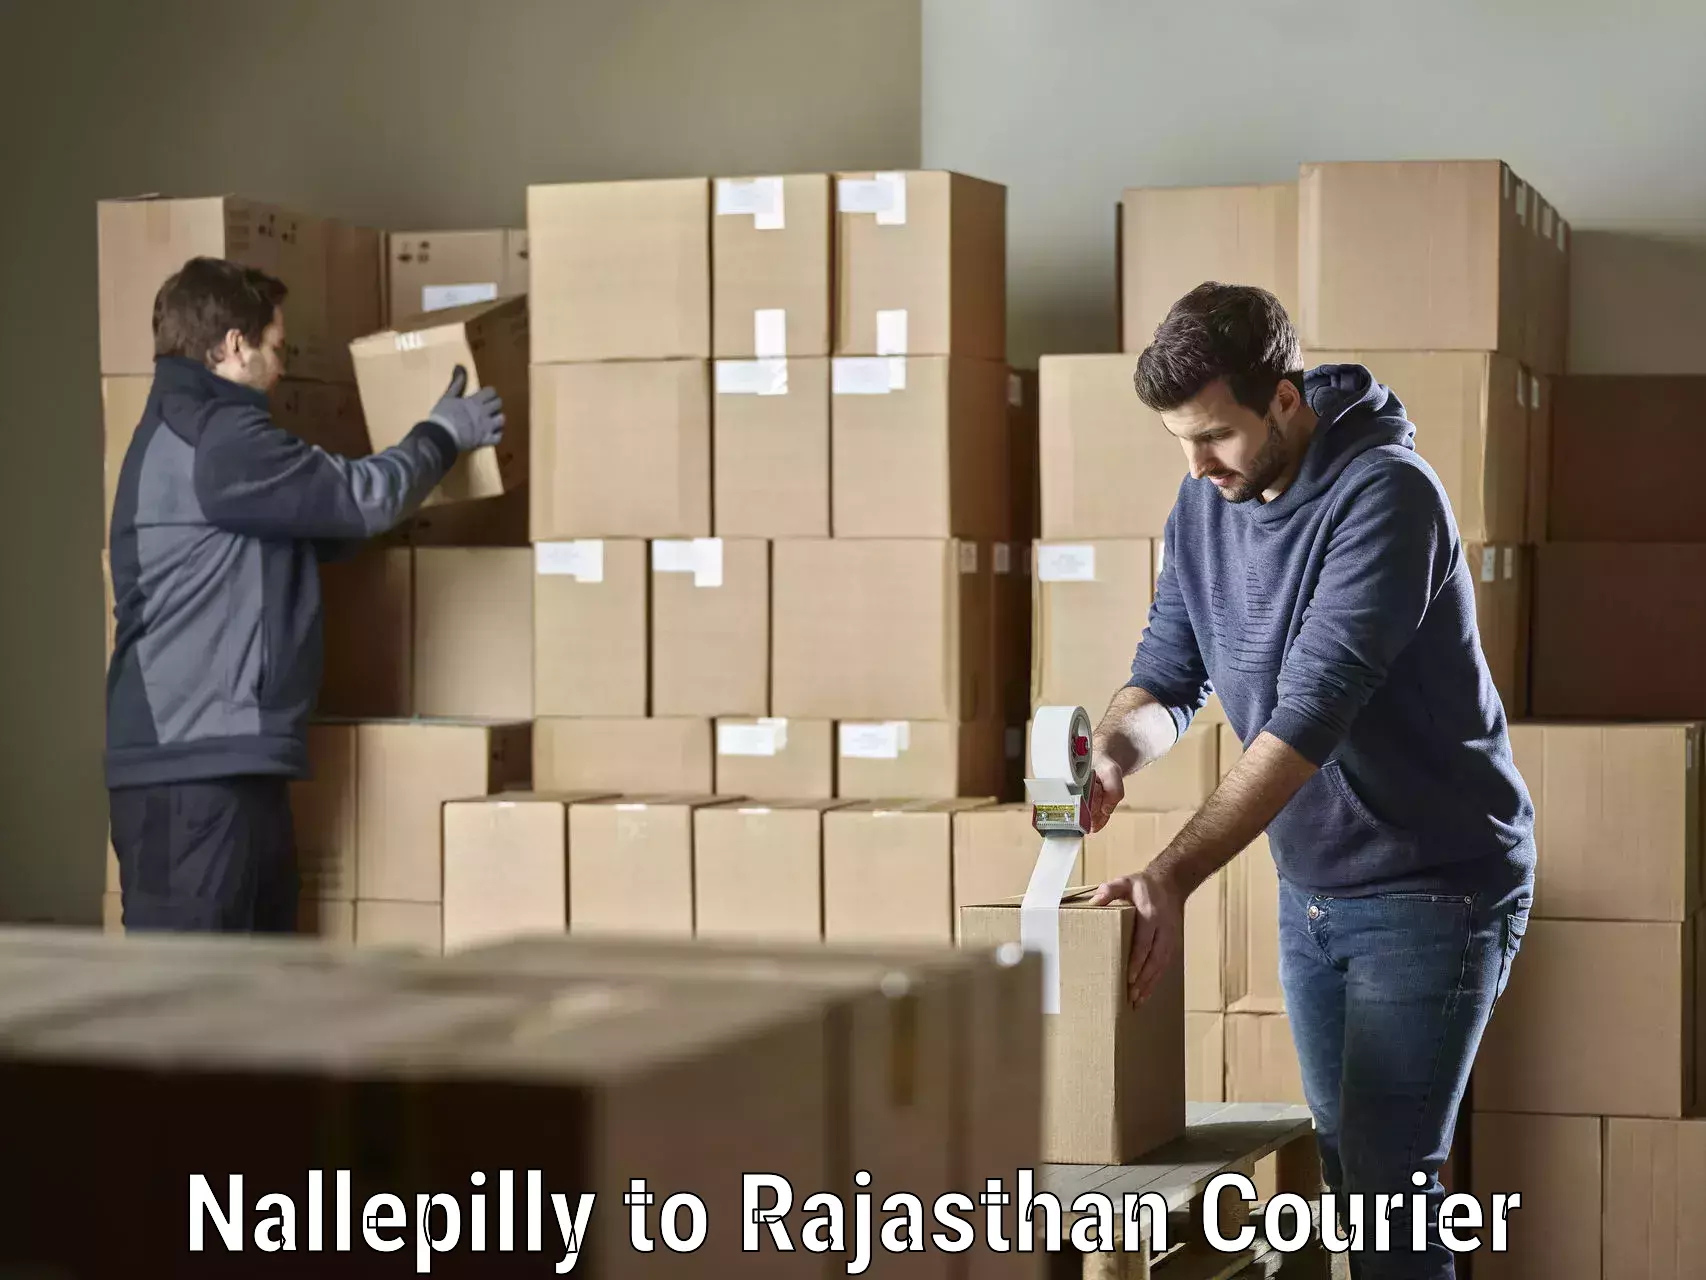 Reliable delivery network Nallepilly to Tonk